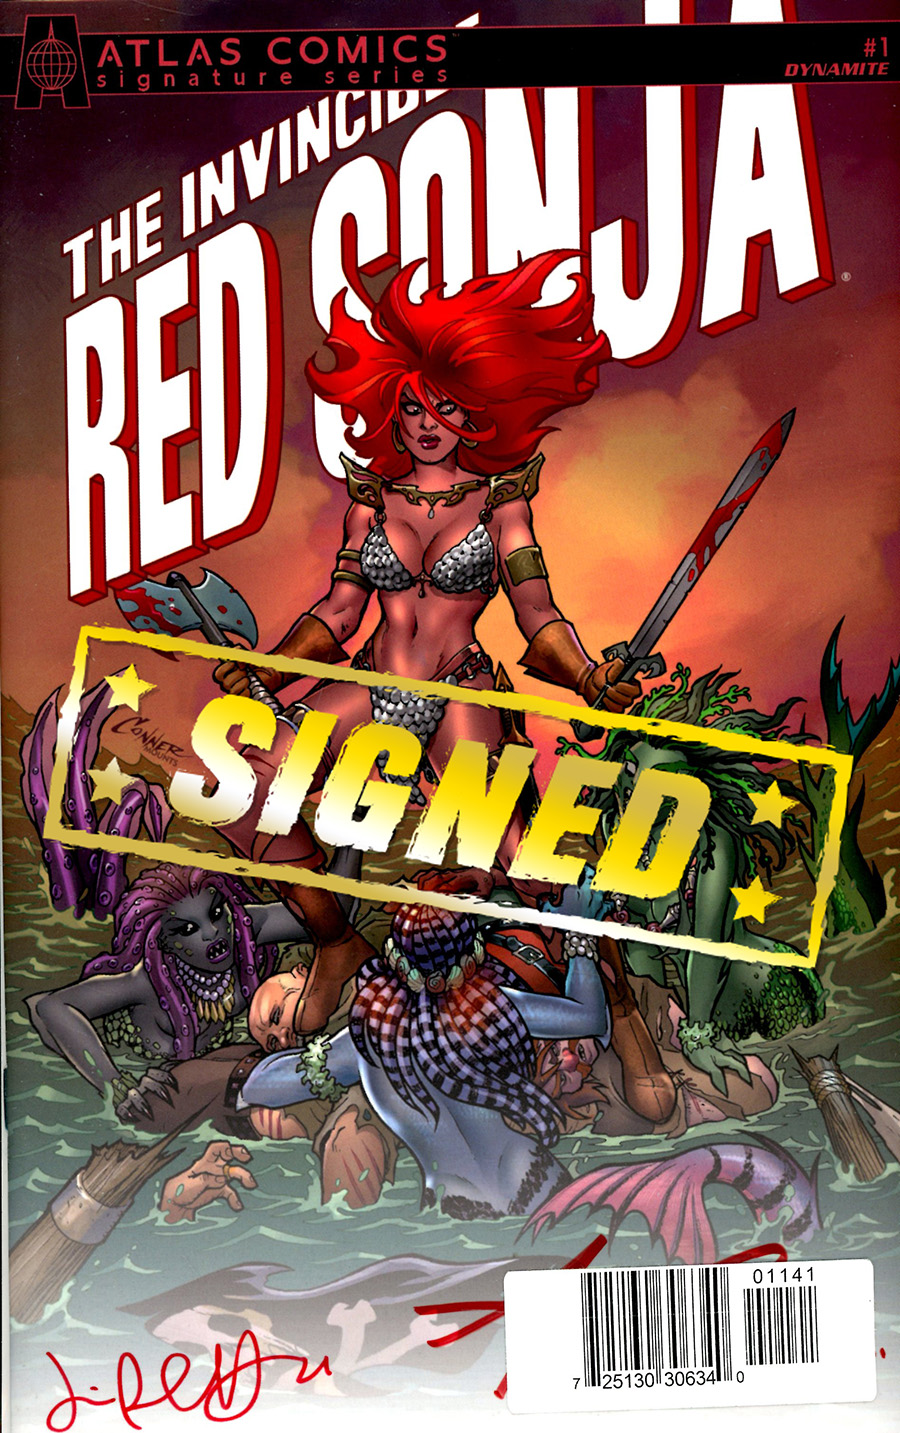 Invincible Red Sonja #1 Cover V Atlas Comics Signature Edition Signed By Jimmy Palmiotti & Amanda Conner